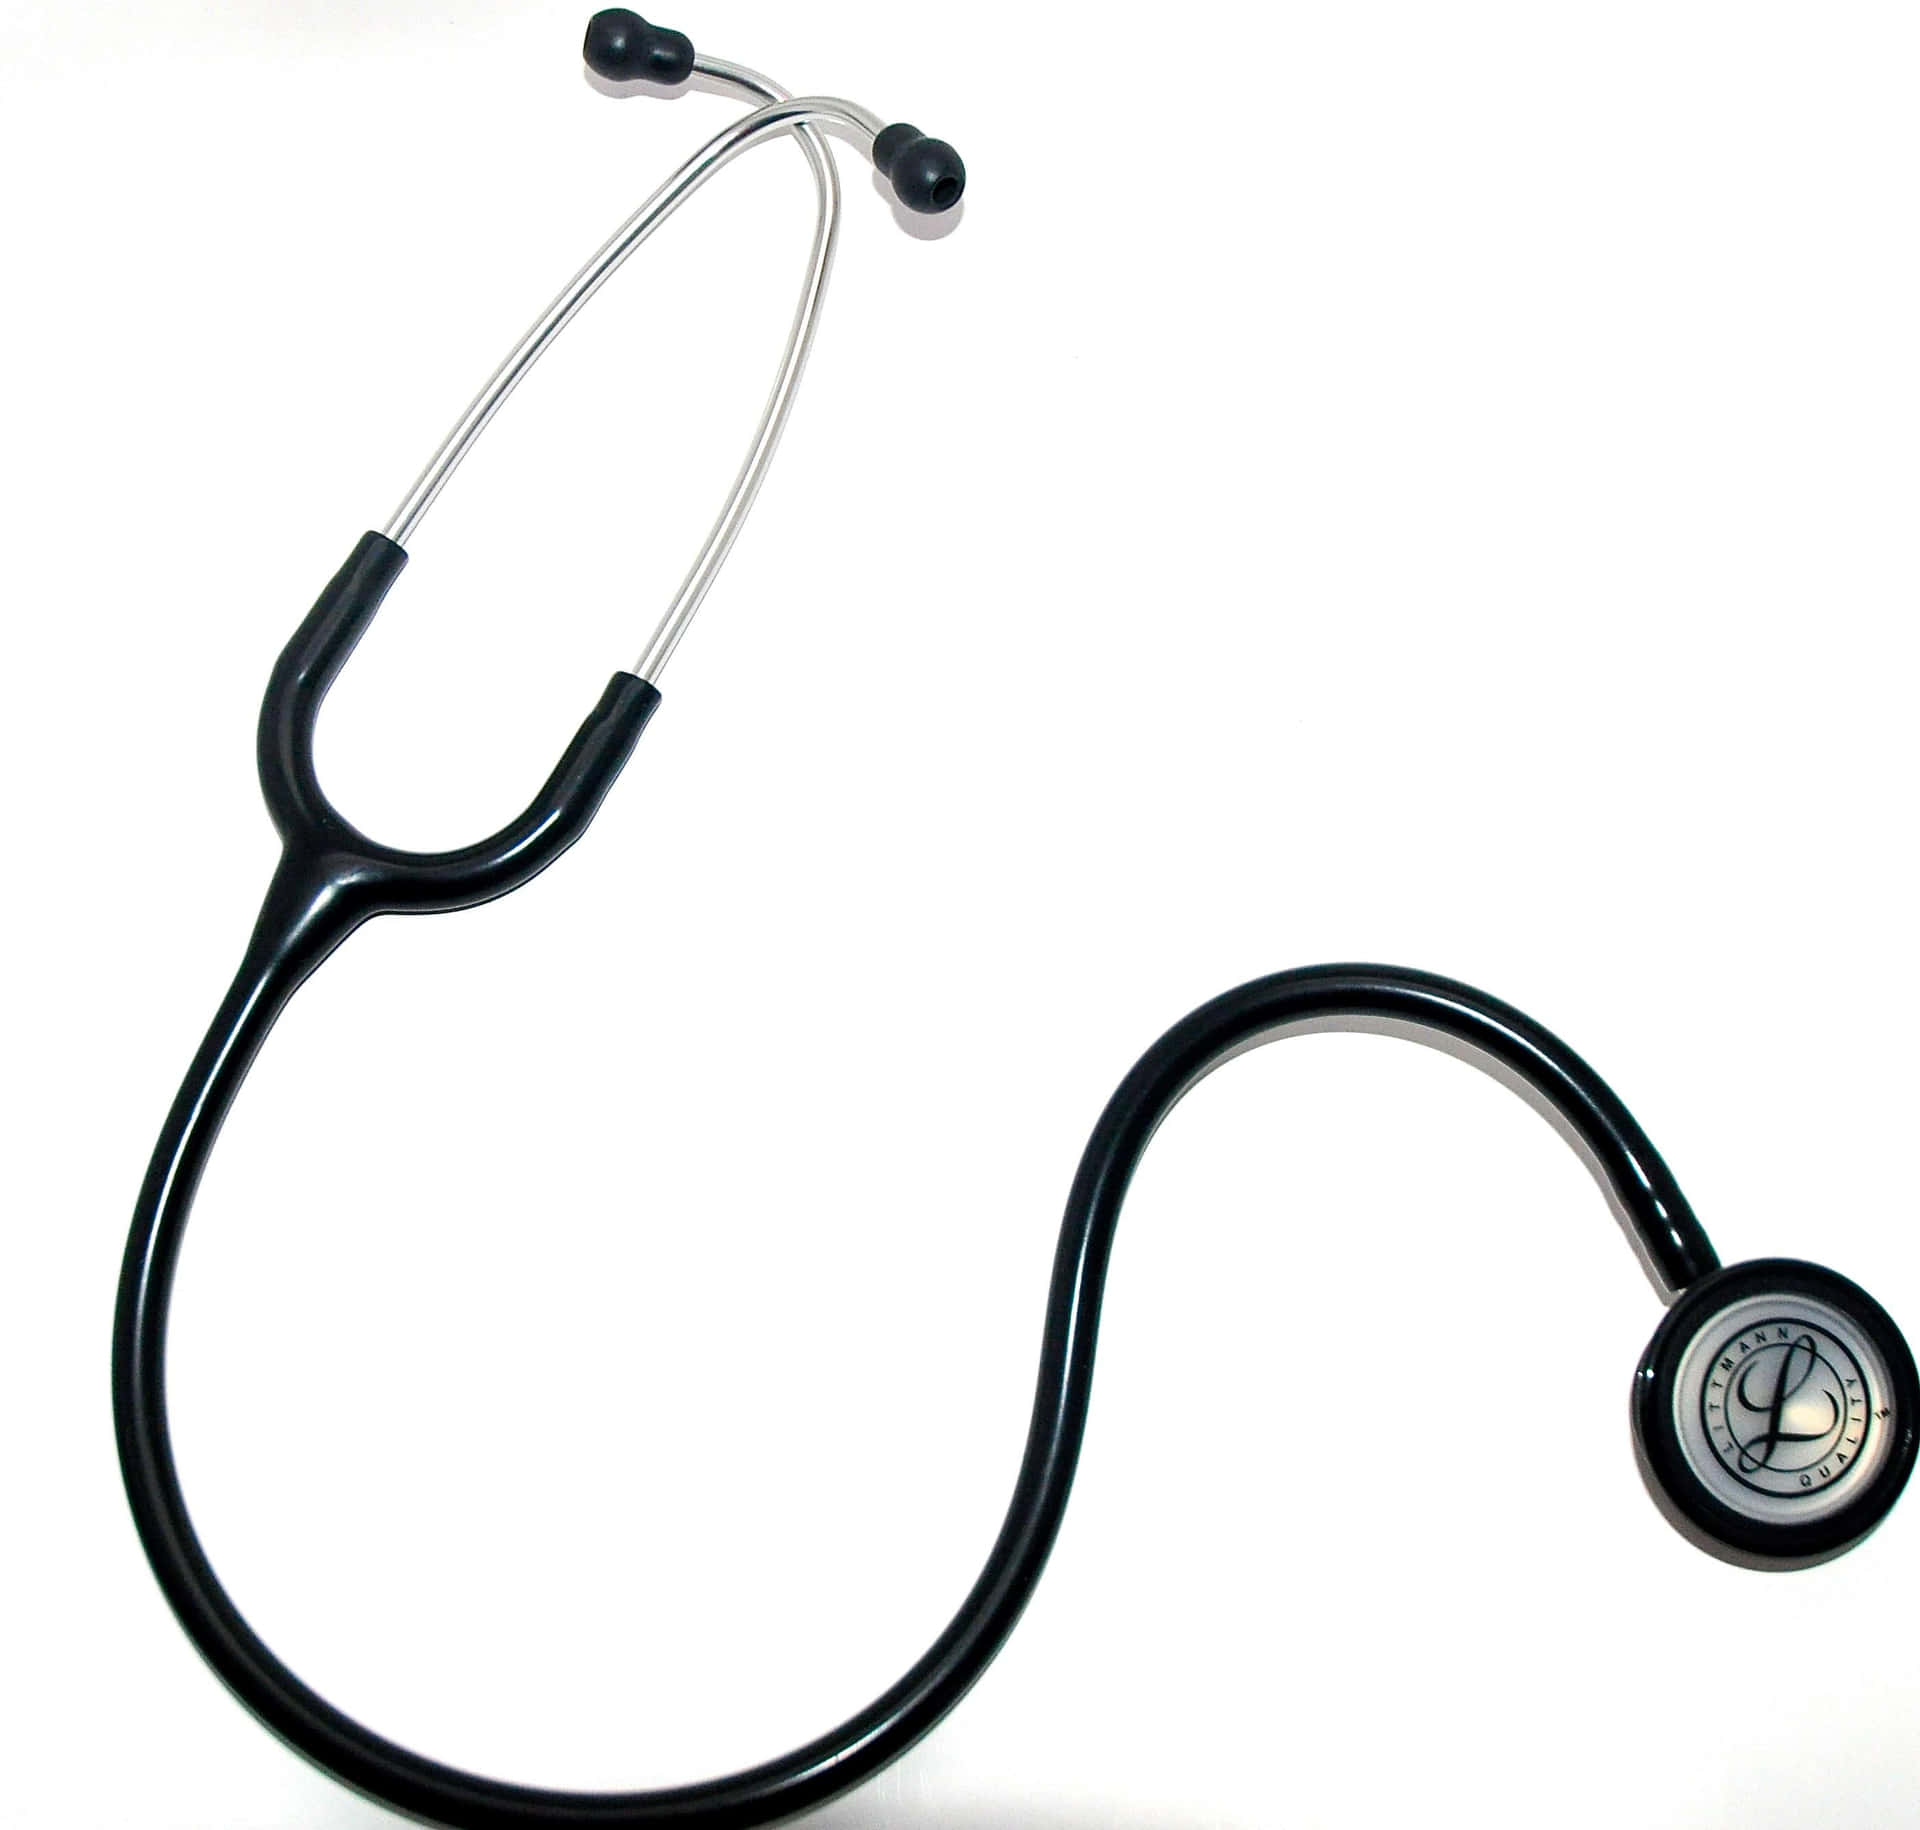 Close-up shot of a stethoscope on a table surface